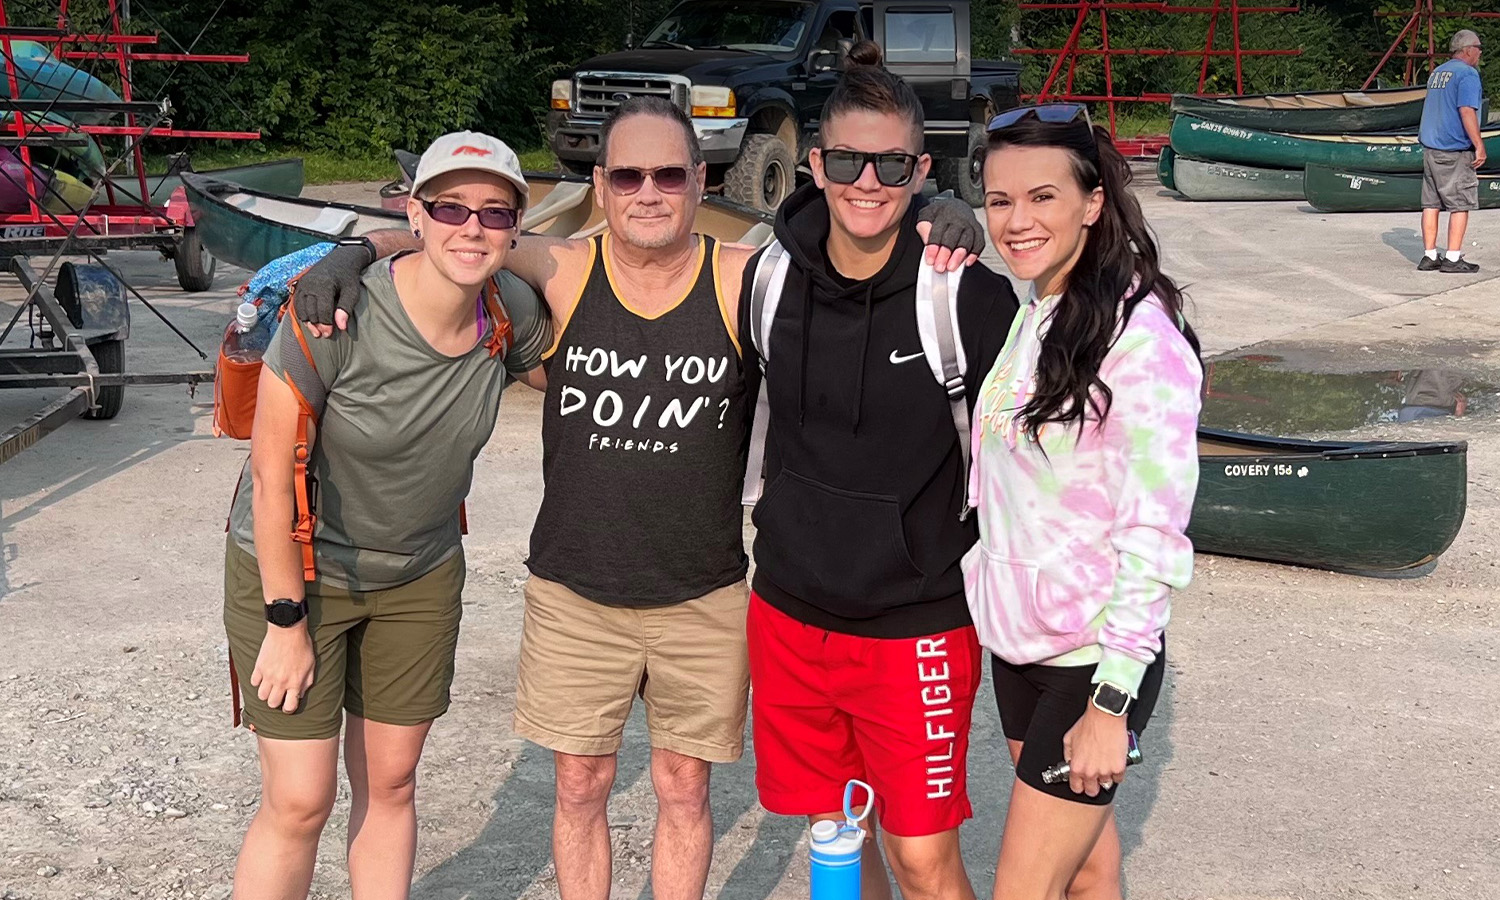 Warehouse Associate Andrea Joyner (left), Estimator Wynn Levi, Hand Bindery Team Lead Shaila Miller (right) and Shaila’s fiancée, Morgann Ancil, participated in a White River Cleanup Event in Indianapolis.